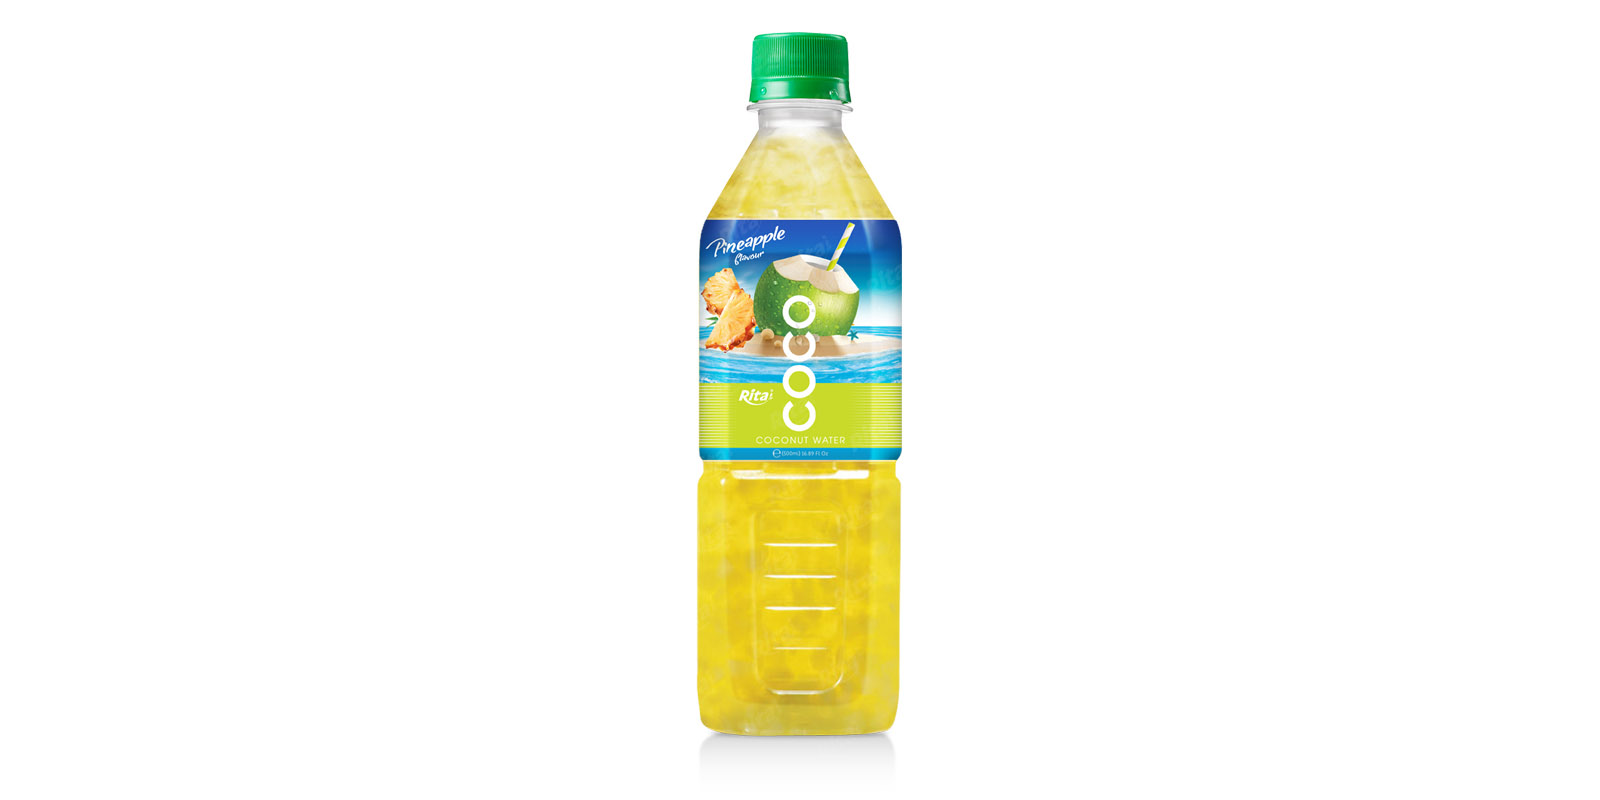 Coconut water with pineapple flavor  500ml Pet bottle from RITA US